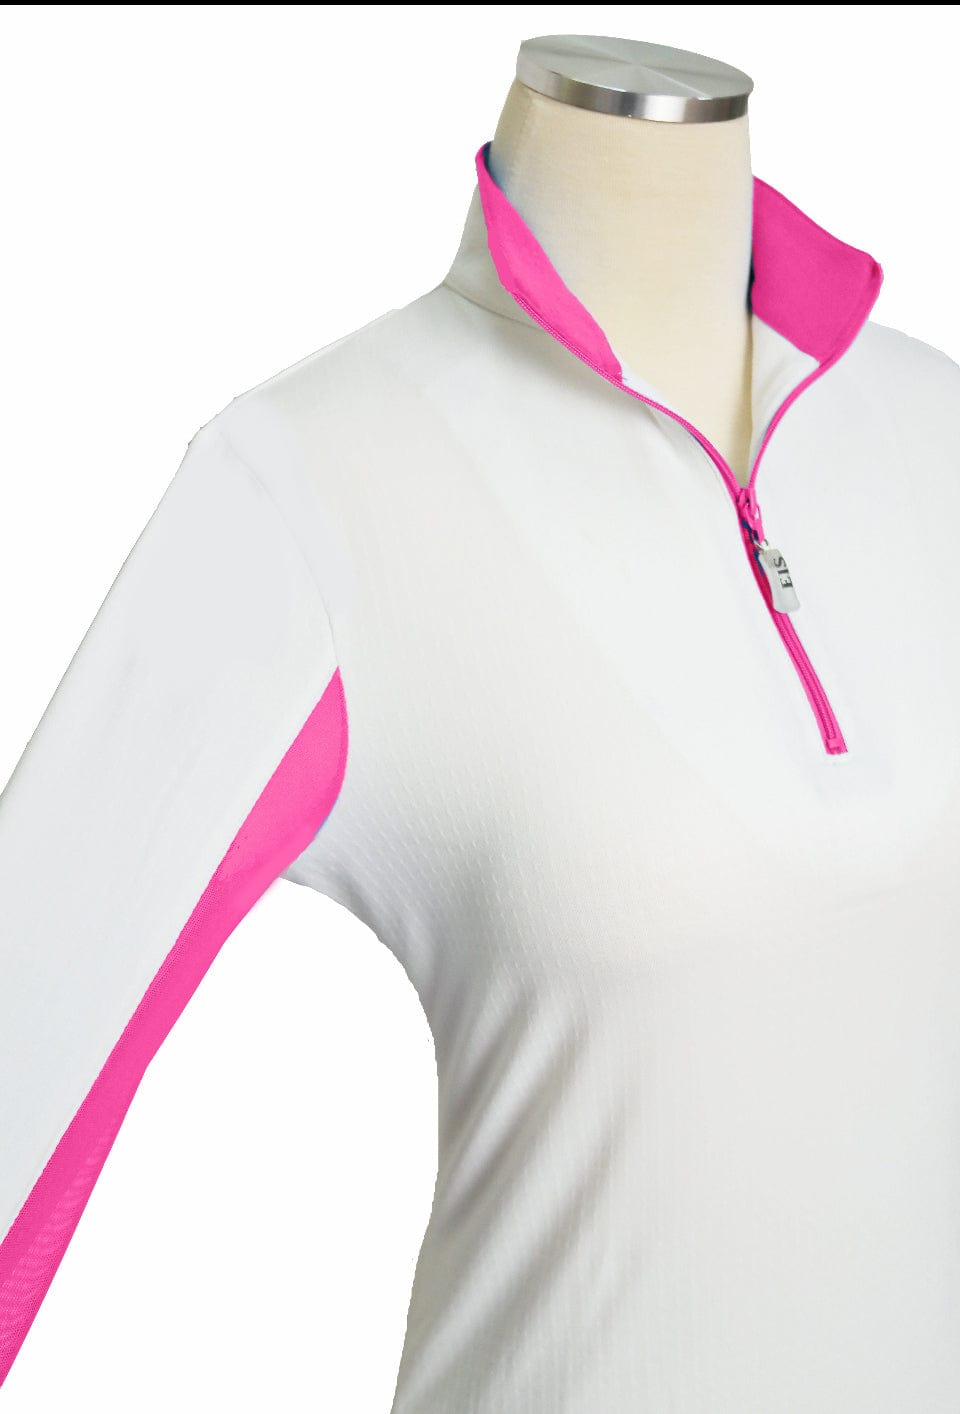 EIS Custom Team Shirts White/Hot Pink EIS- Sunshirts XXL equestrian team apparel online tack store mobile tack store custom farm apparel custom show stable clothing equestrian lifestyle horse show clothing riding clothes horses equestrian tack store